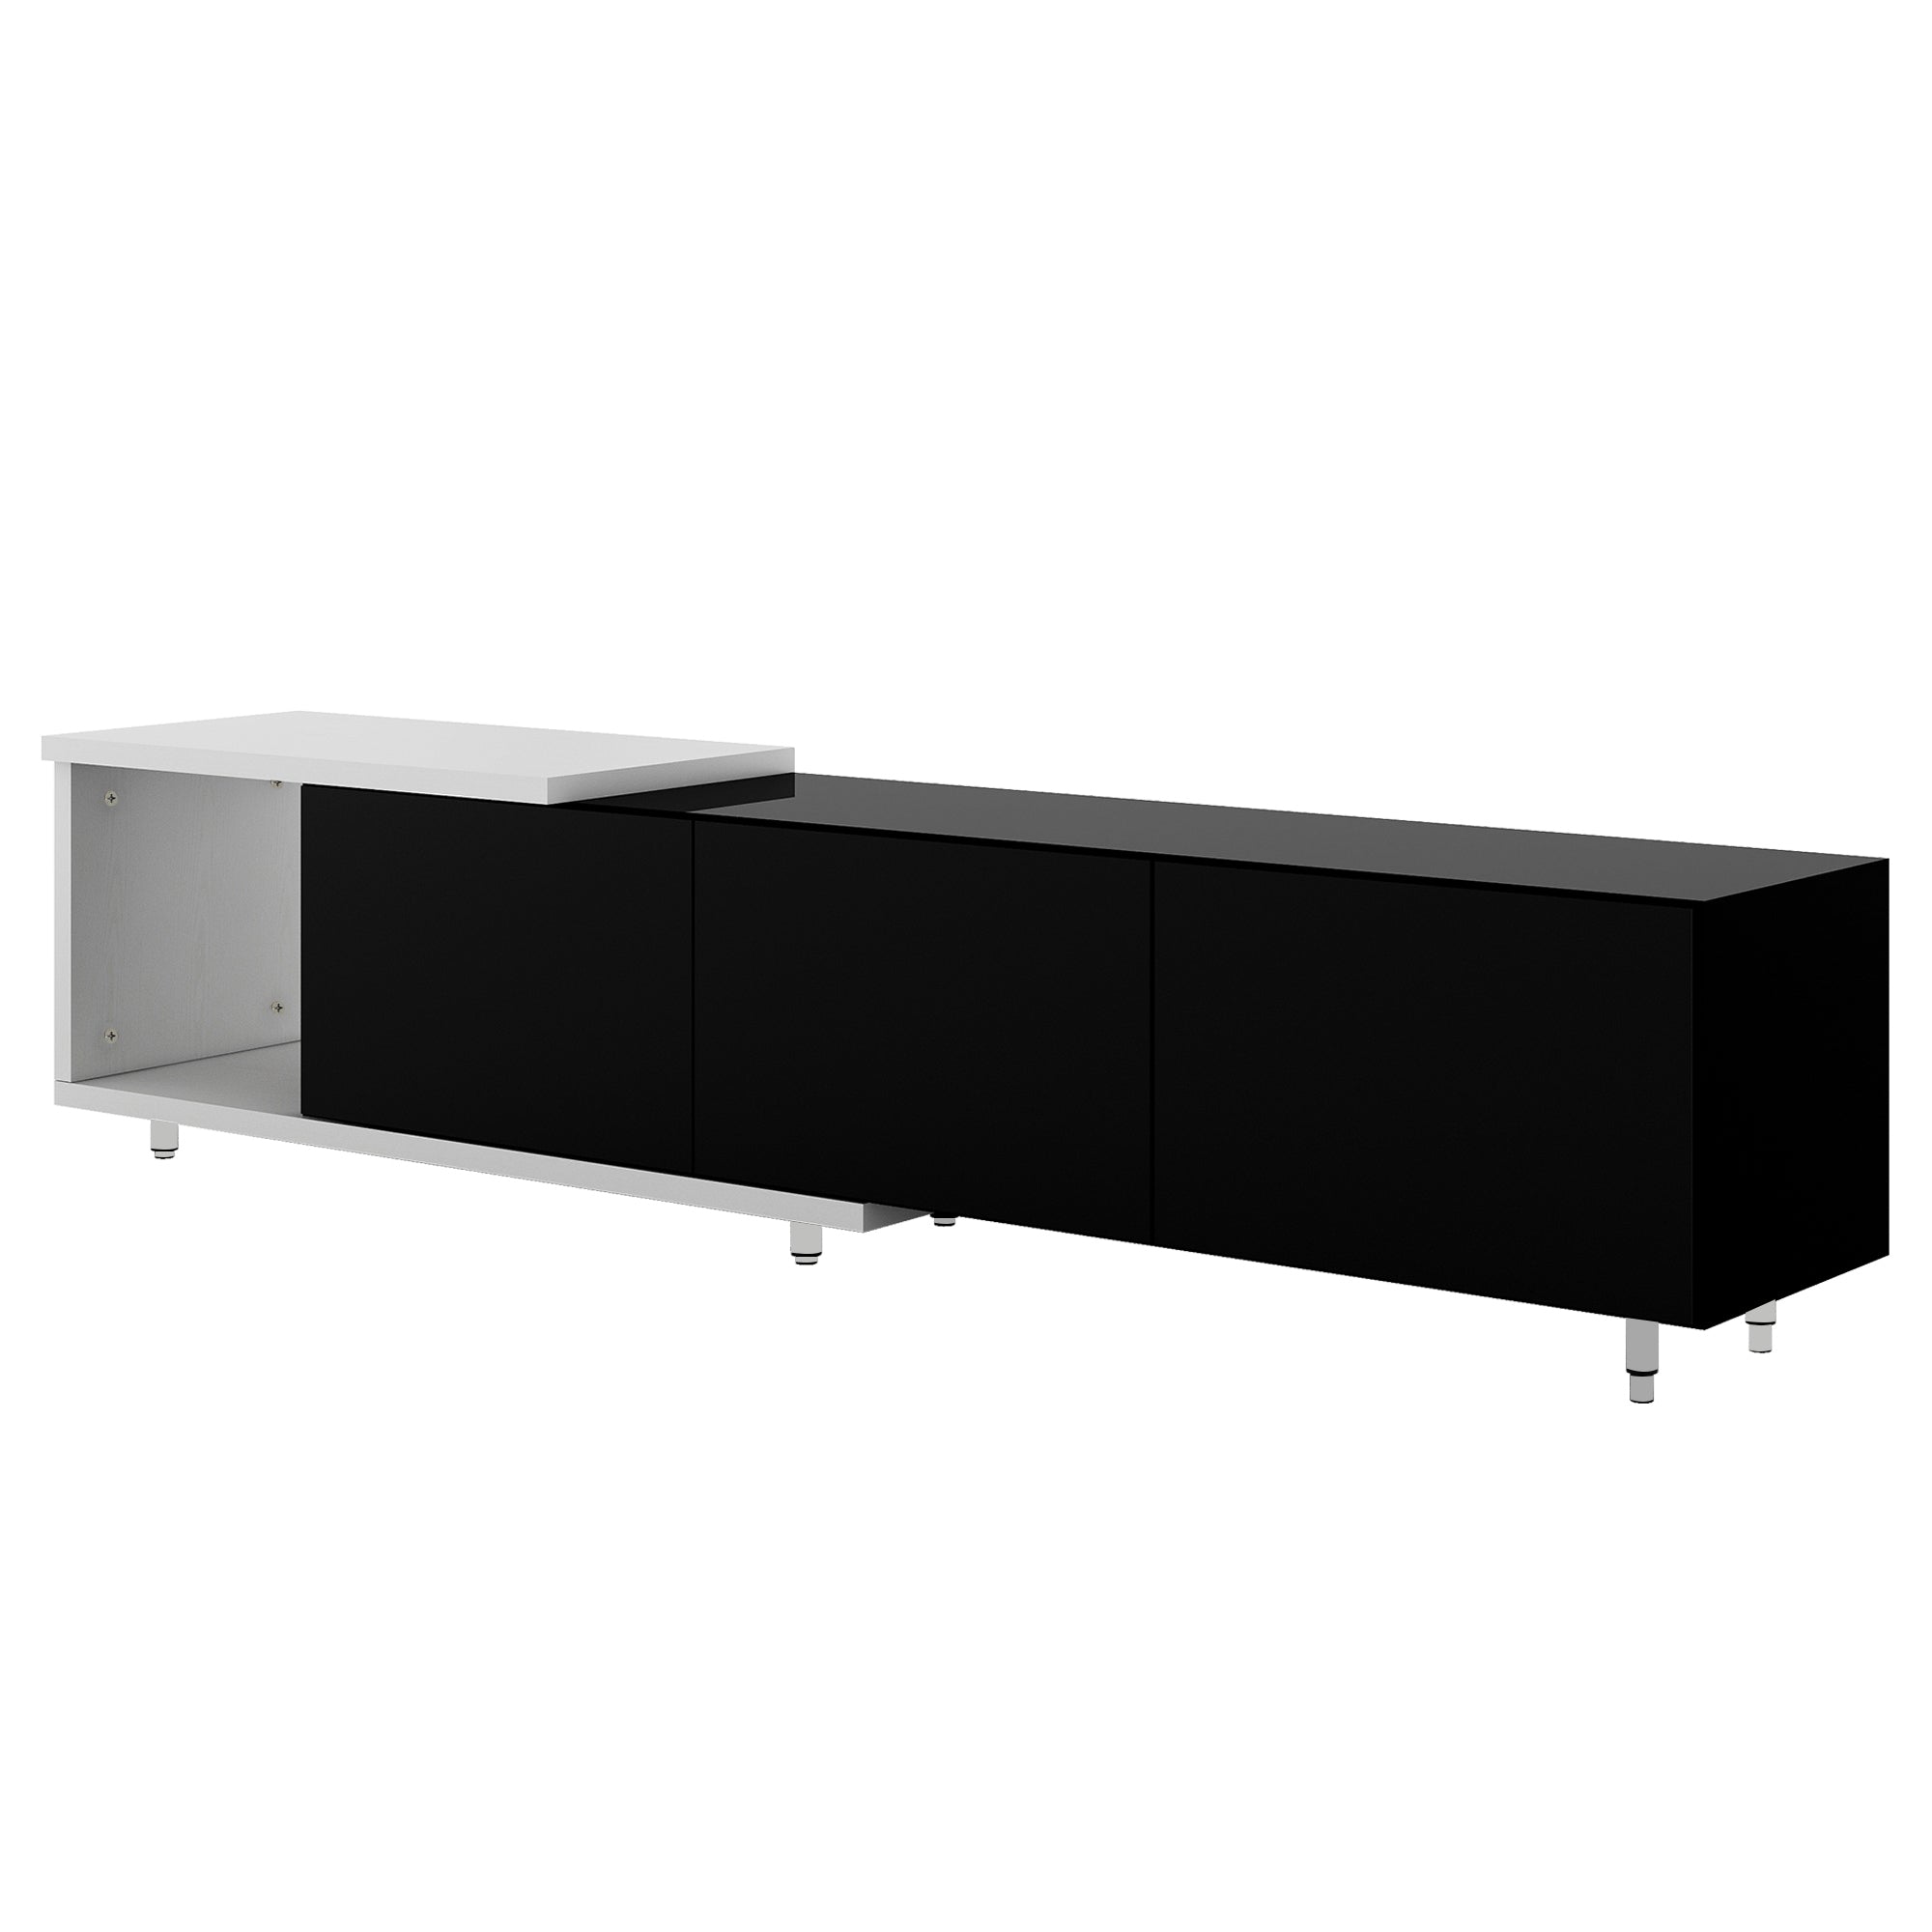 U Can Modern ,Stylish TV Stand TV Cabinet for 80 inch black-particle board